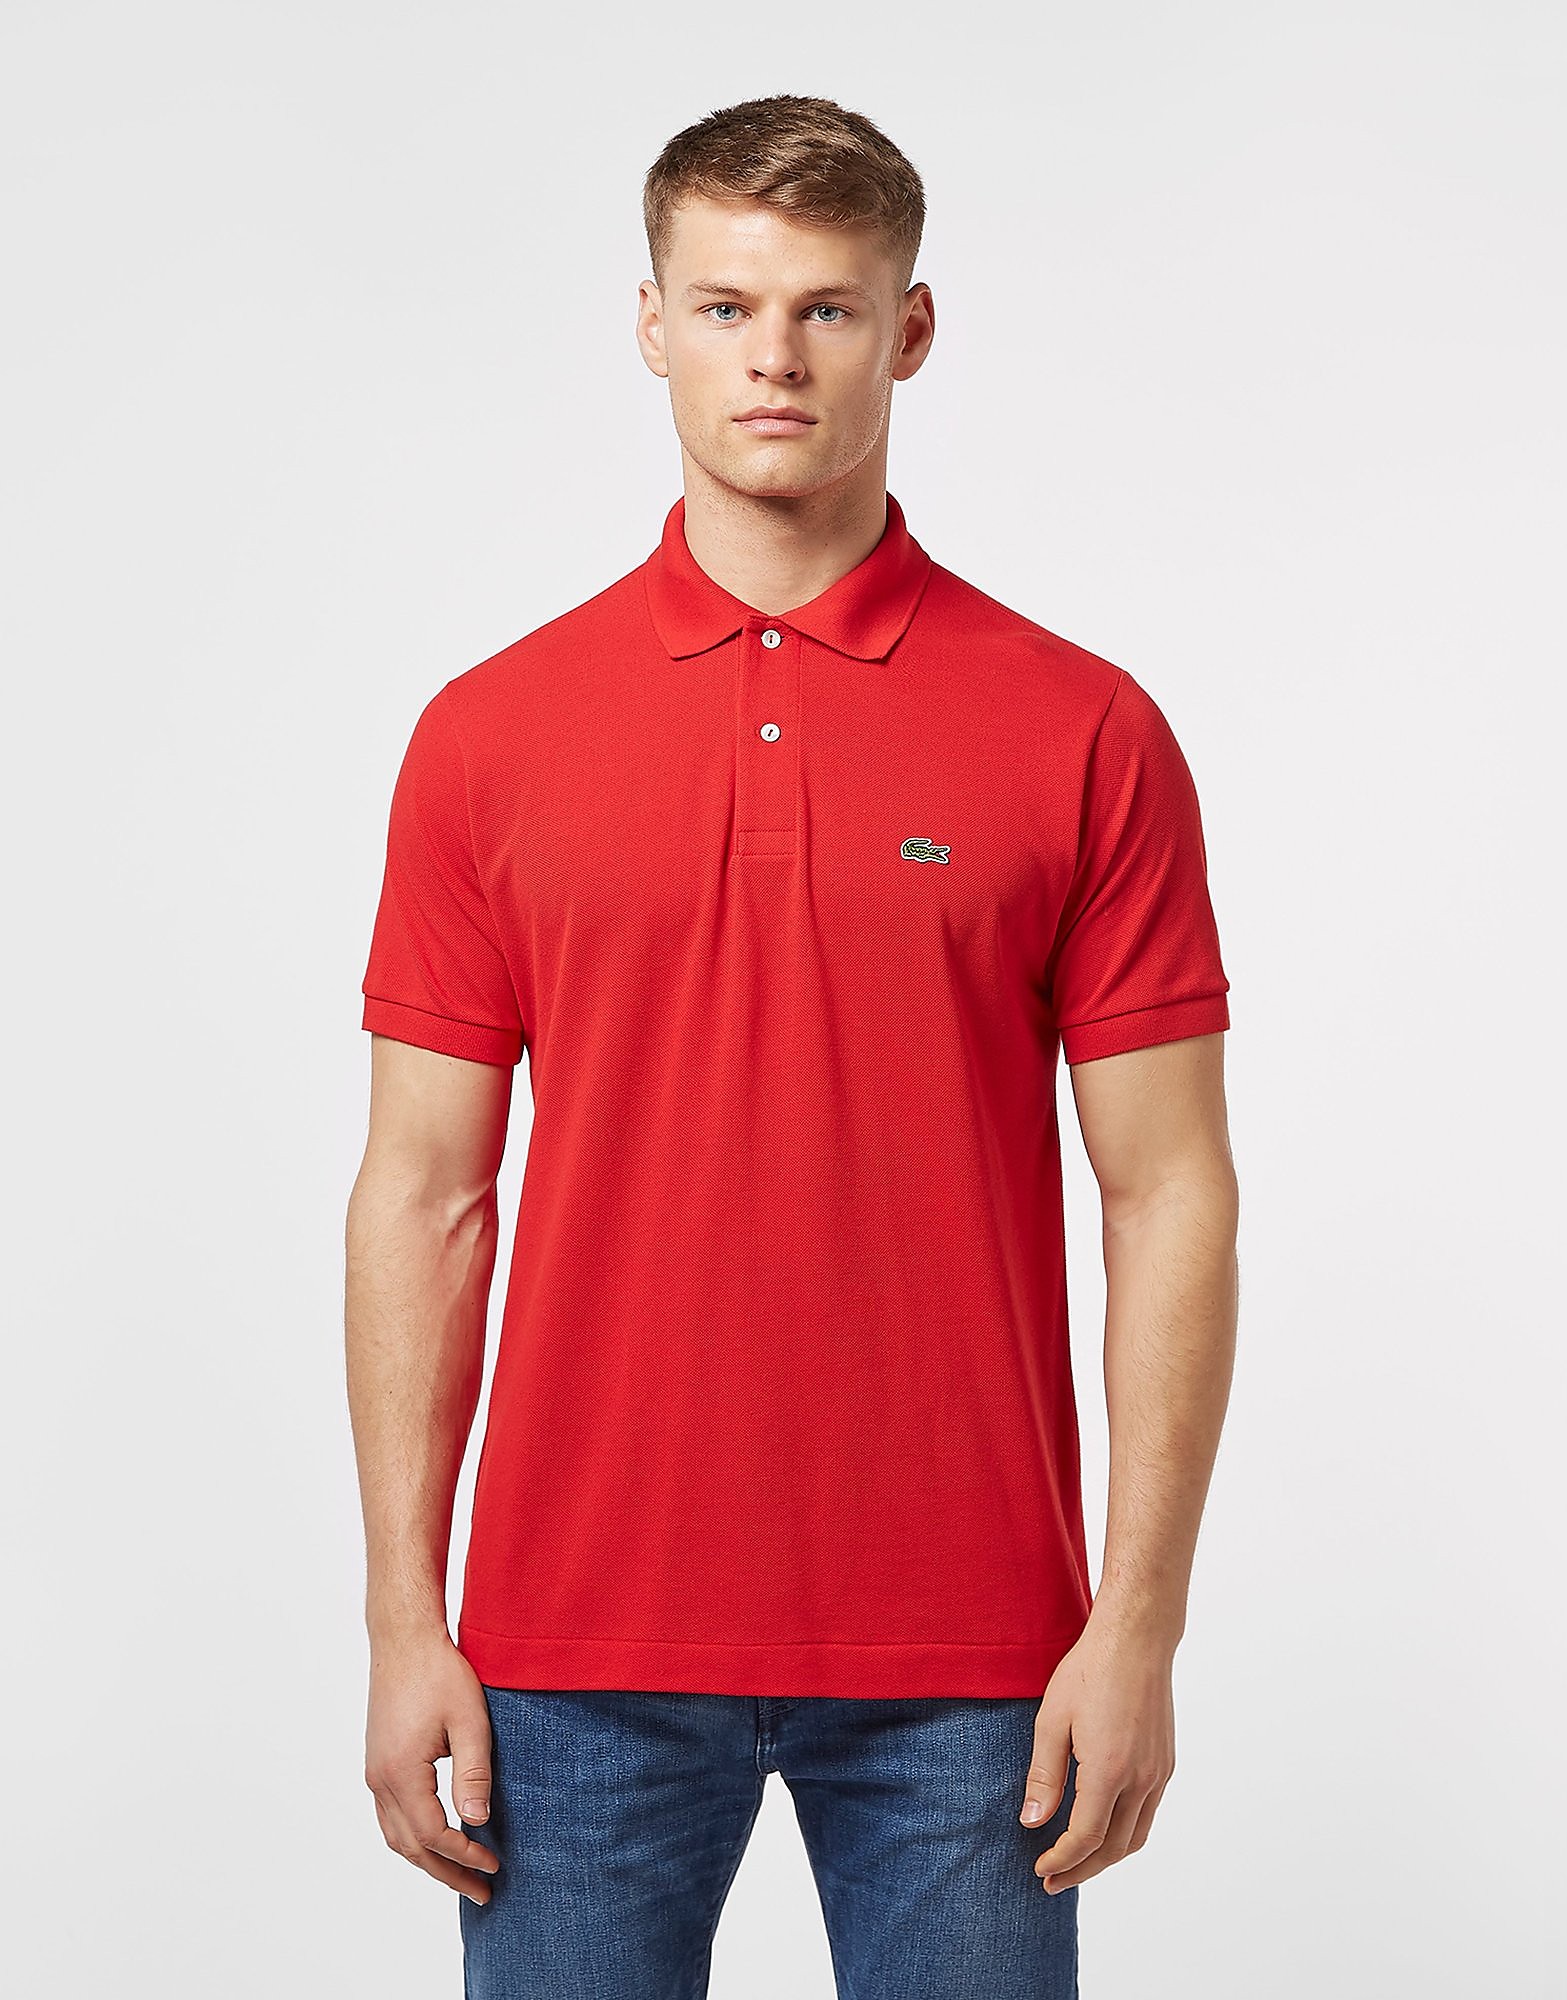 Lacoste Men's L1212 Polo Shirt - Red, Red